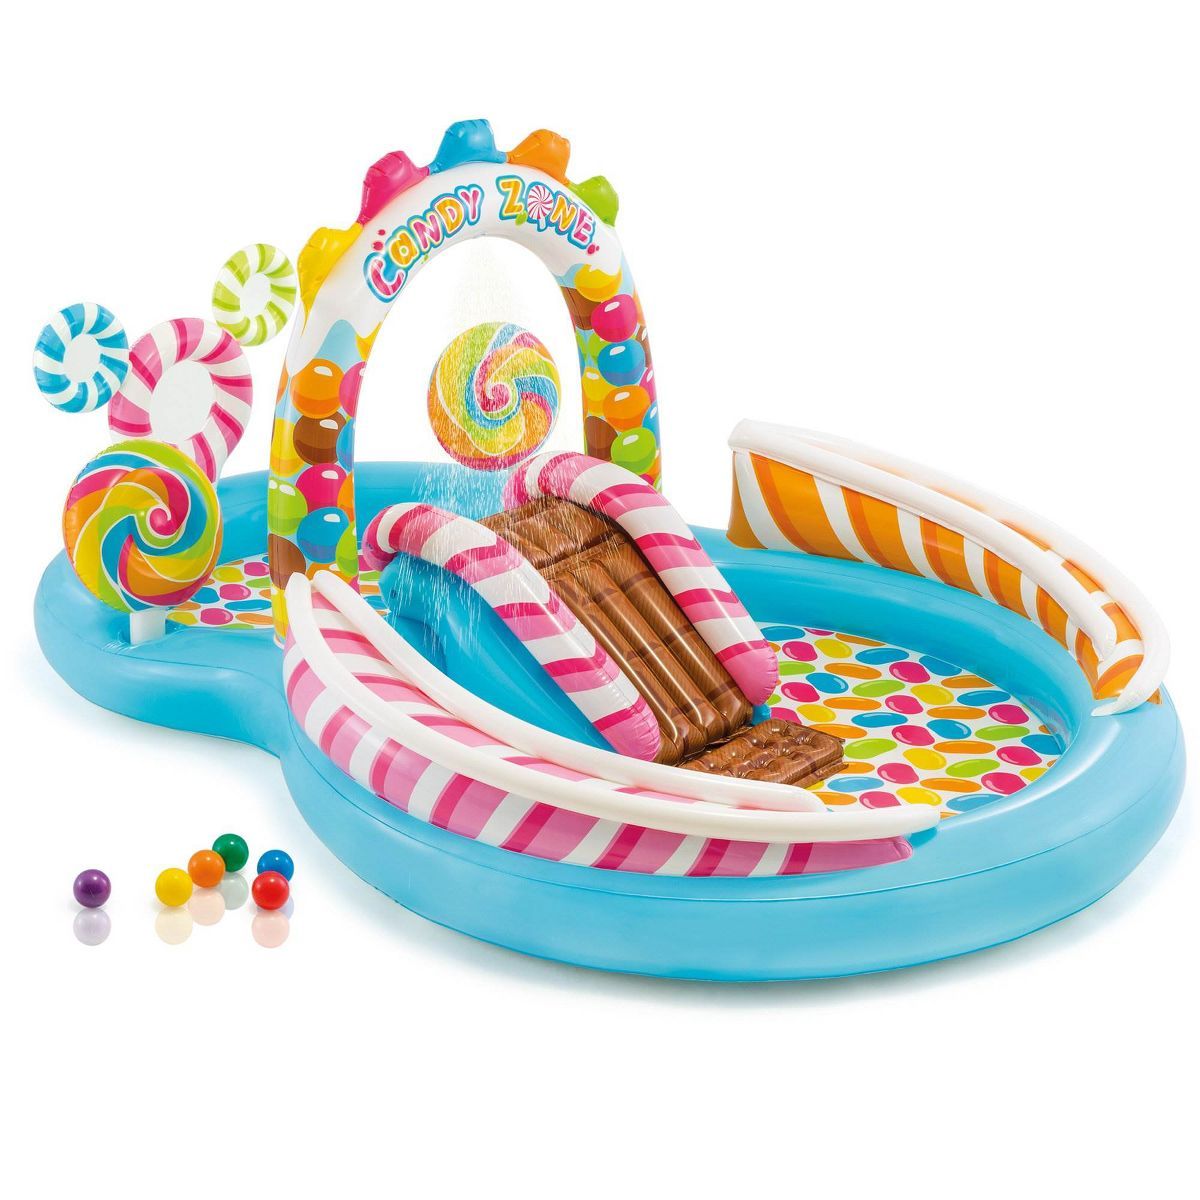 Intex 9' x 6' x 51" Kids Inflatable Candy Zone Play Center Pool with Waterslide | Target